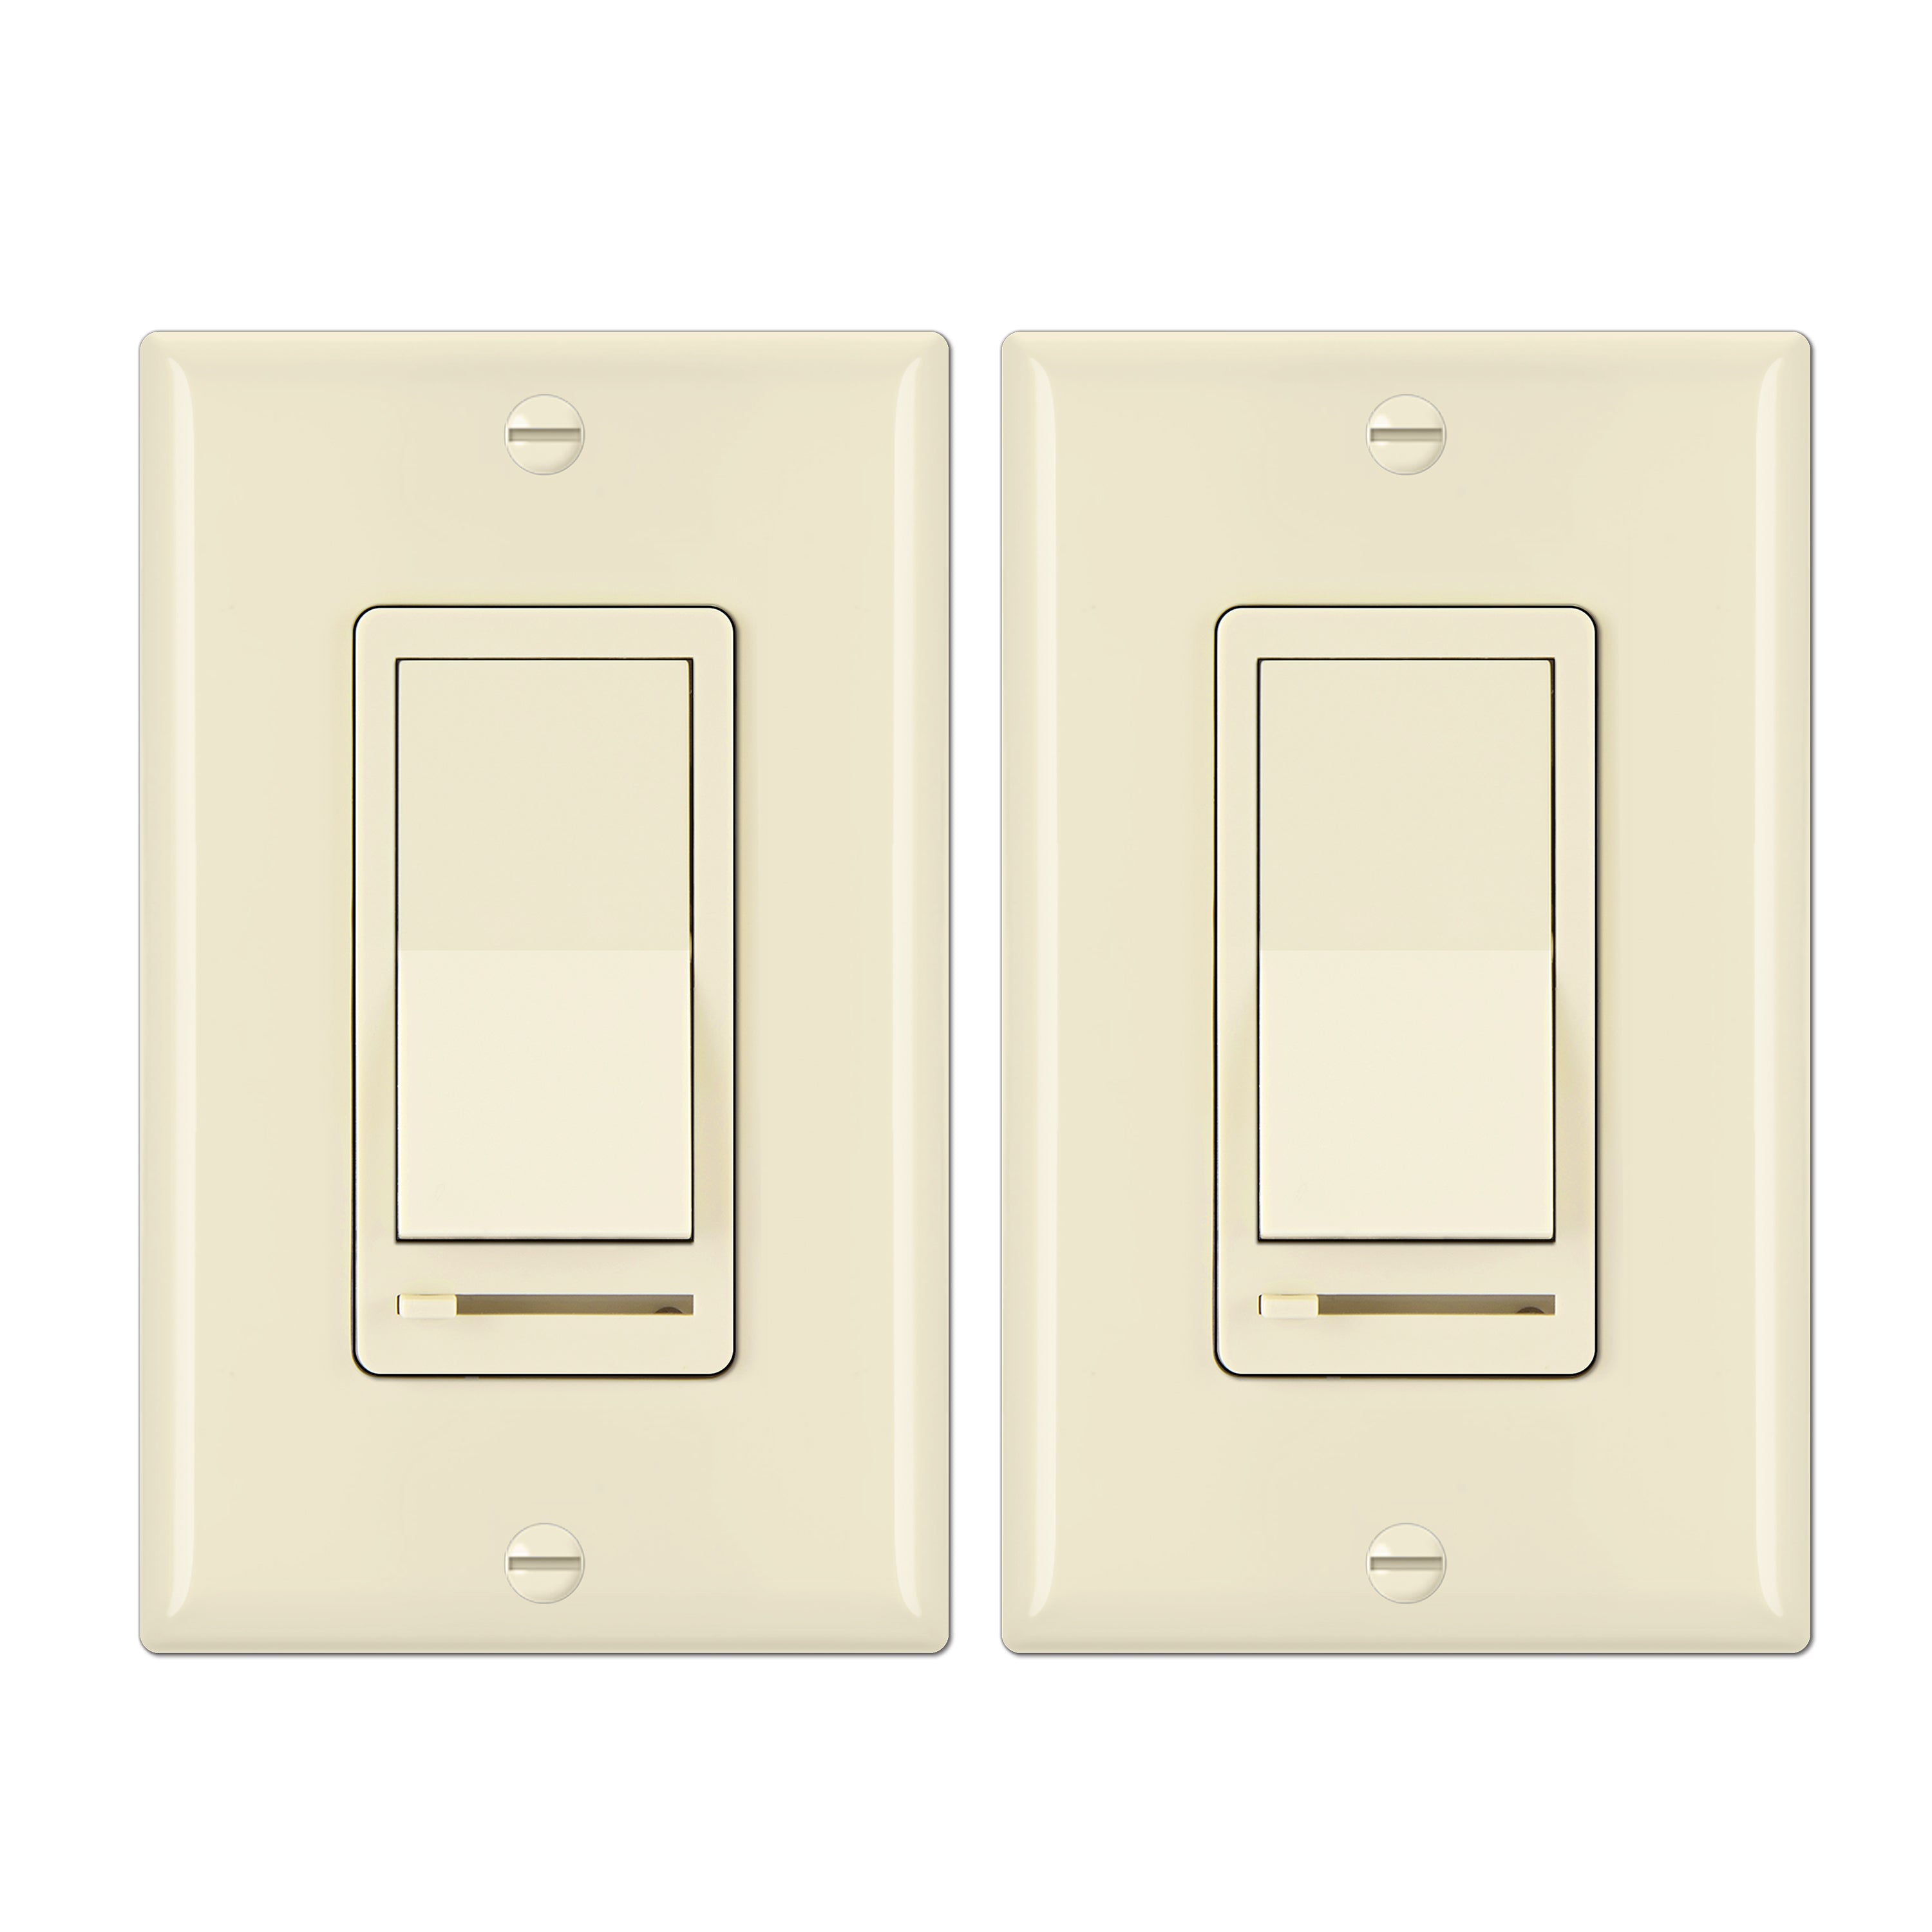 [2 Pack] BESTTEN Almond Dimmer Wall Light Switch, Single-Pole or 3-Way,  Compatible with Dimmable LED, Incandescent, Halogen and CFL Bulbs,  Wallplate Included, UL Listed